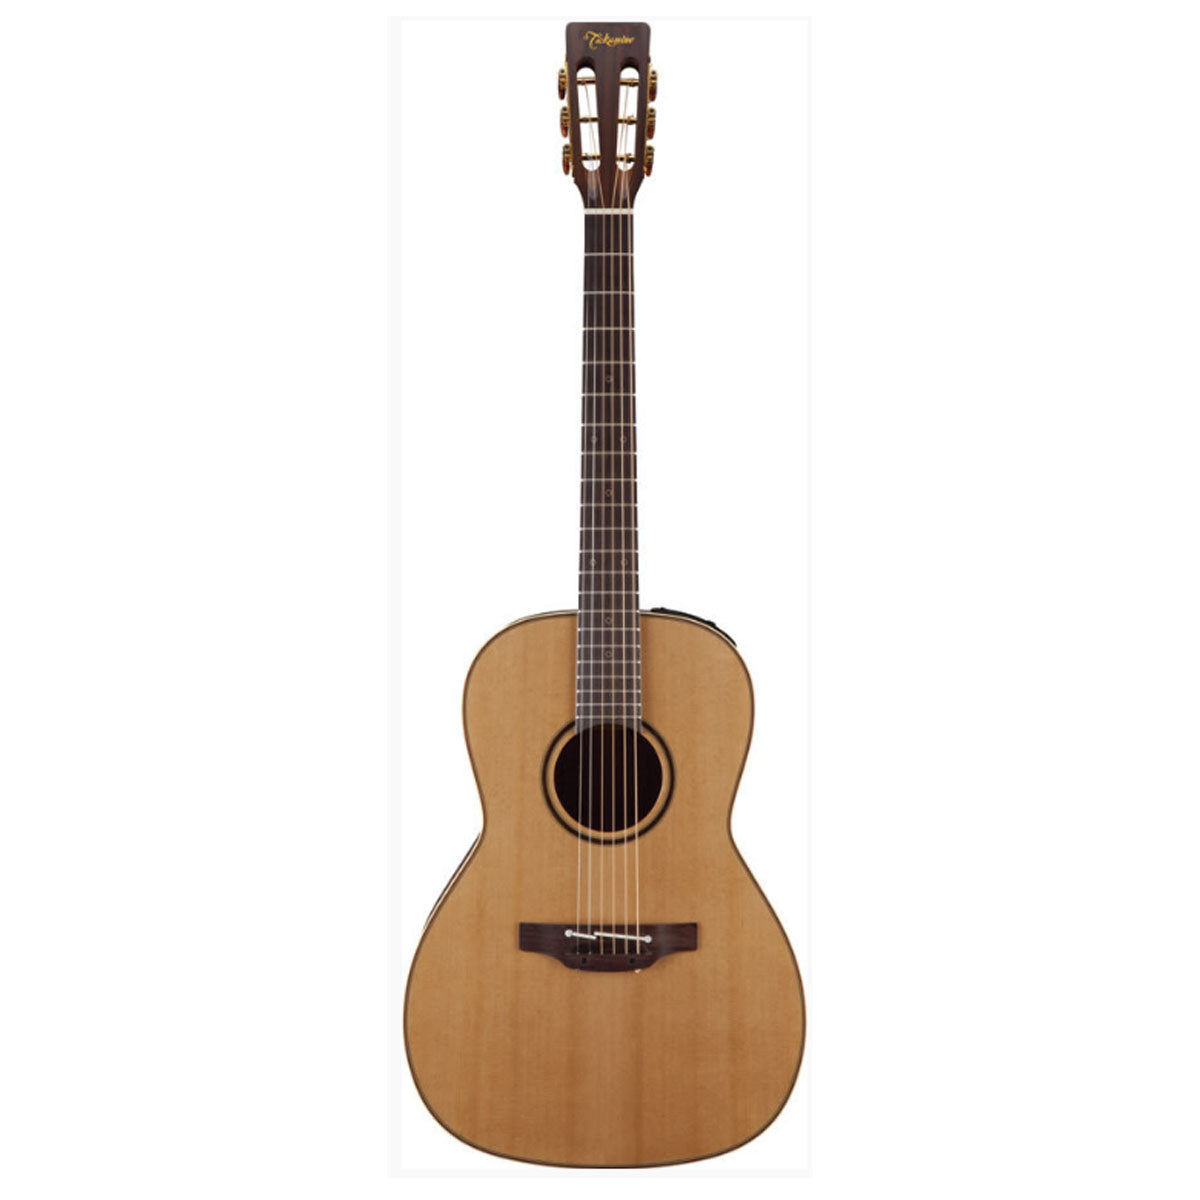 Takamine P3NY Pro Series 3 Acoustic Guitar Left Handed New Yorker Natural w/ Pickup